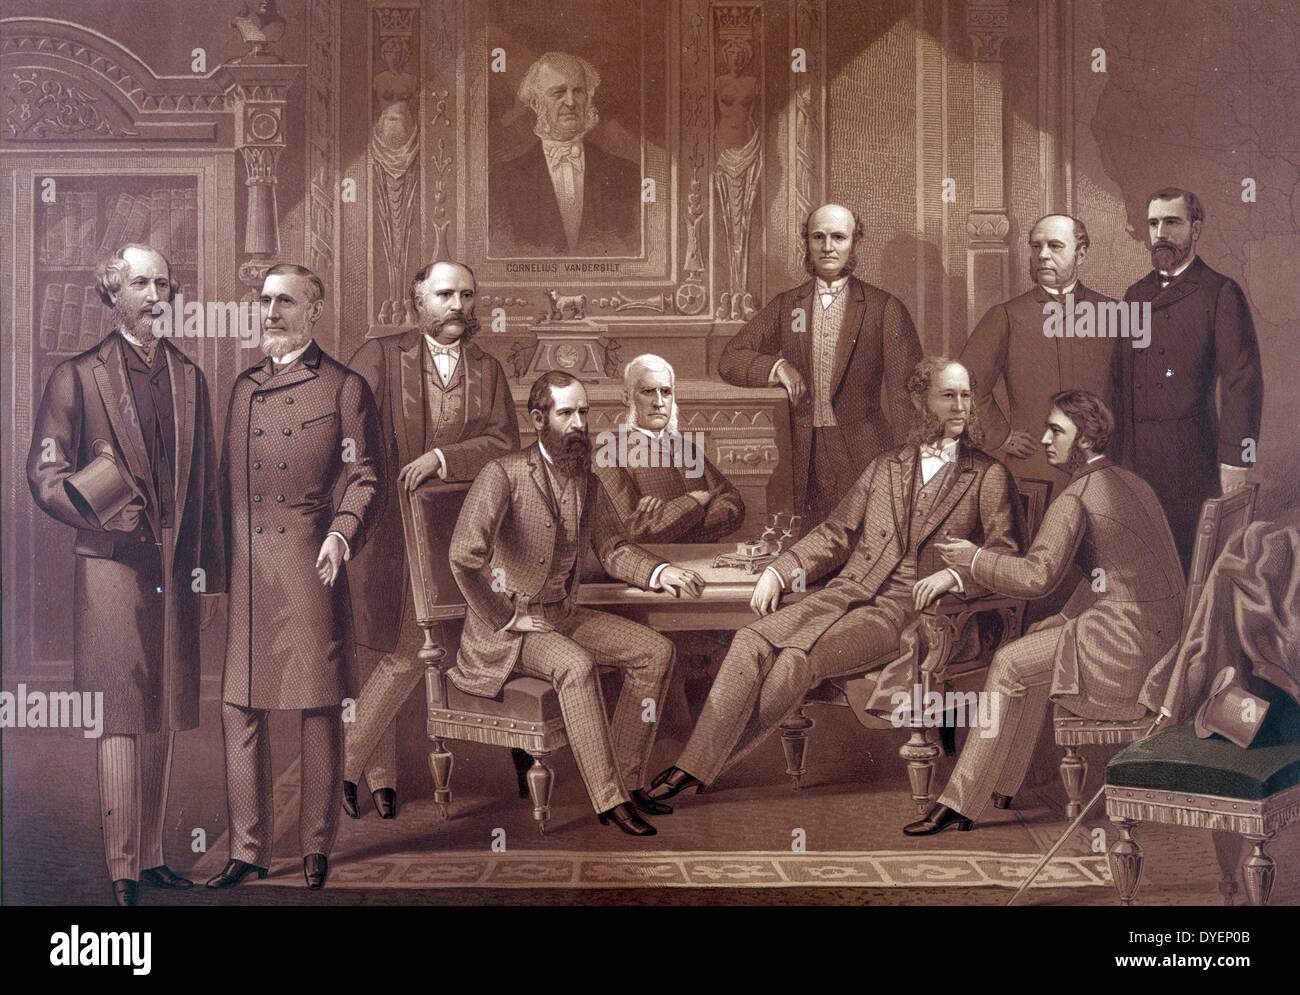 The kings of Wall Street Published 18820101. Illustration depicting famous American financiers and industrialists and bankers. From left Cyrus Westfield, Russell Sage, Rufus Hatch, Jay Gould, Sidney Dillon, Darius, Ogden Mills, William Henry Vanderbilt and August Belmont, George Ballou and James Keane a portrait of Cornelius Vanderbilt hangs above the group. Stock Photo